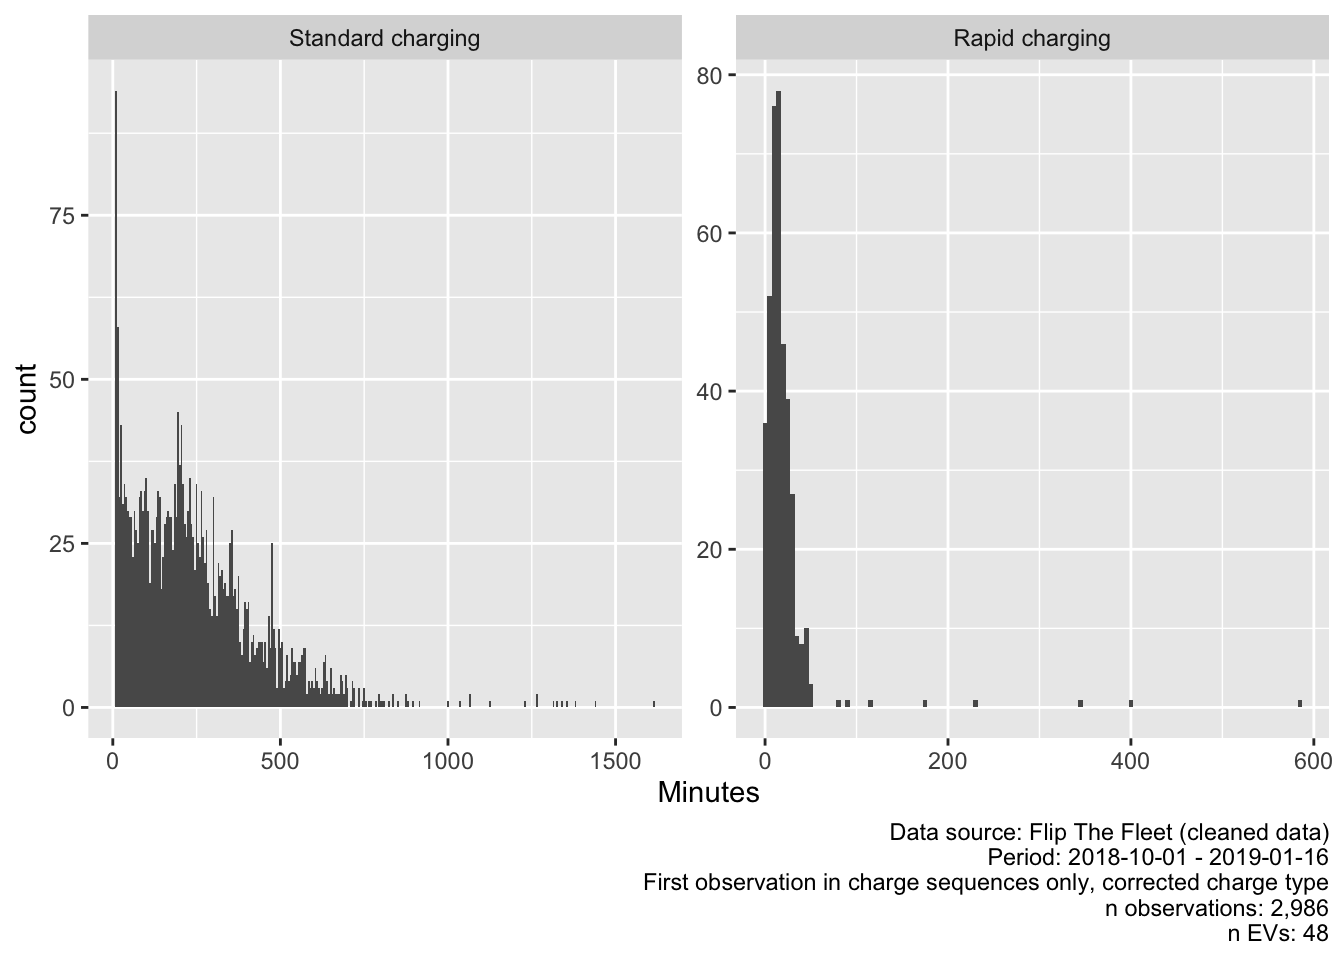 Duration of charging sequences with unreasonably long or short values removed